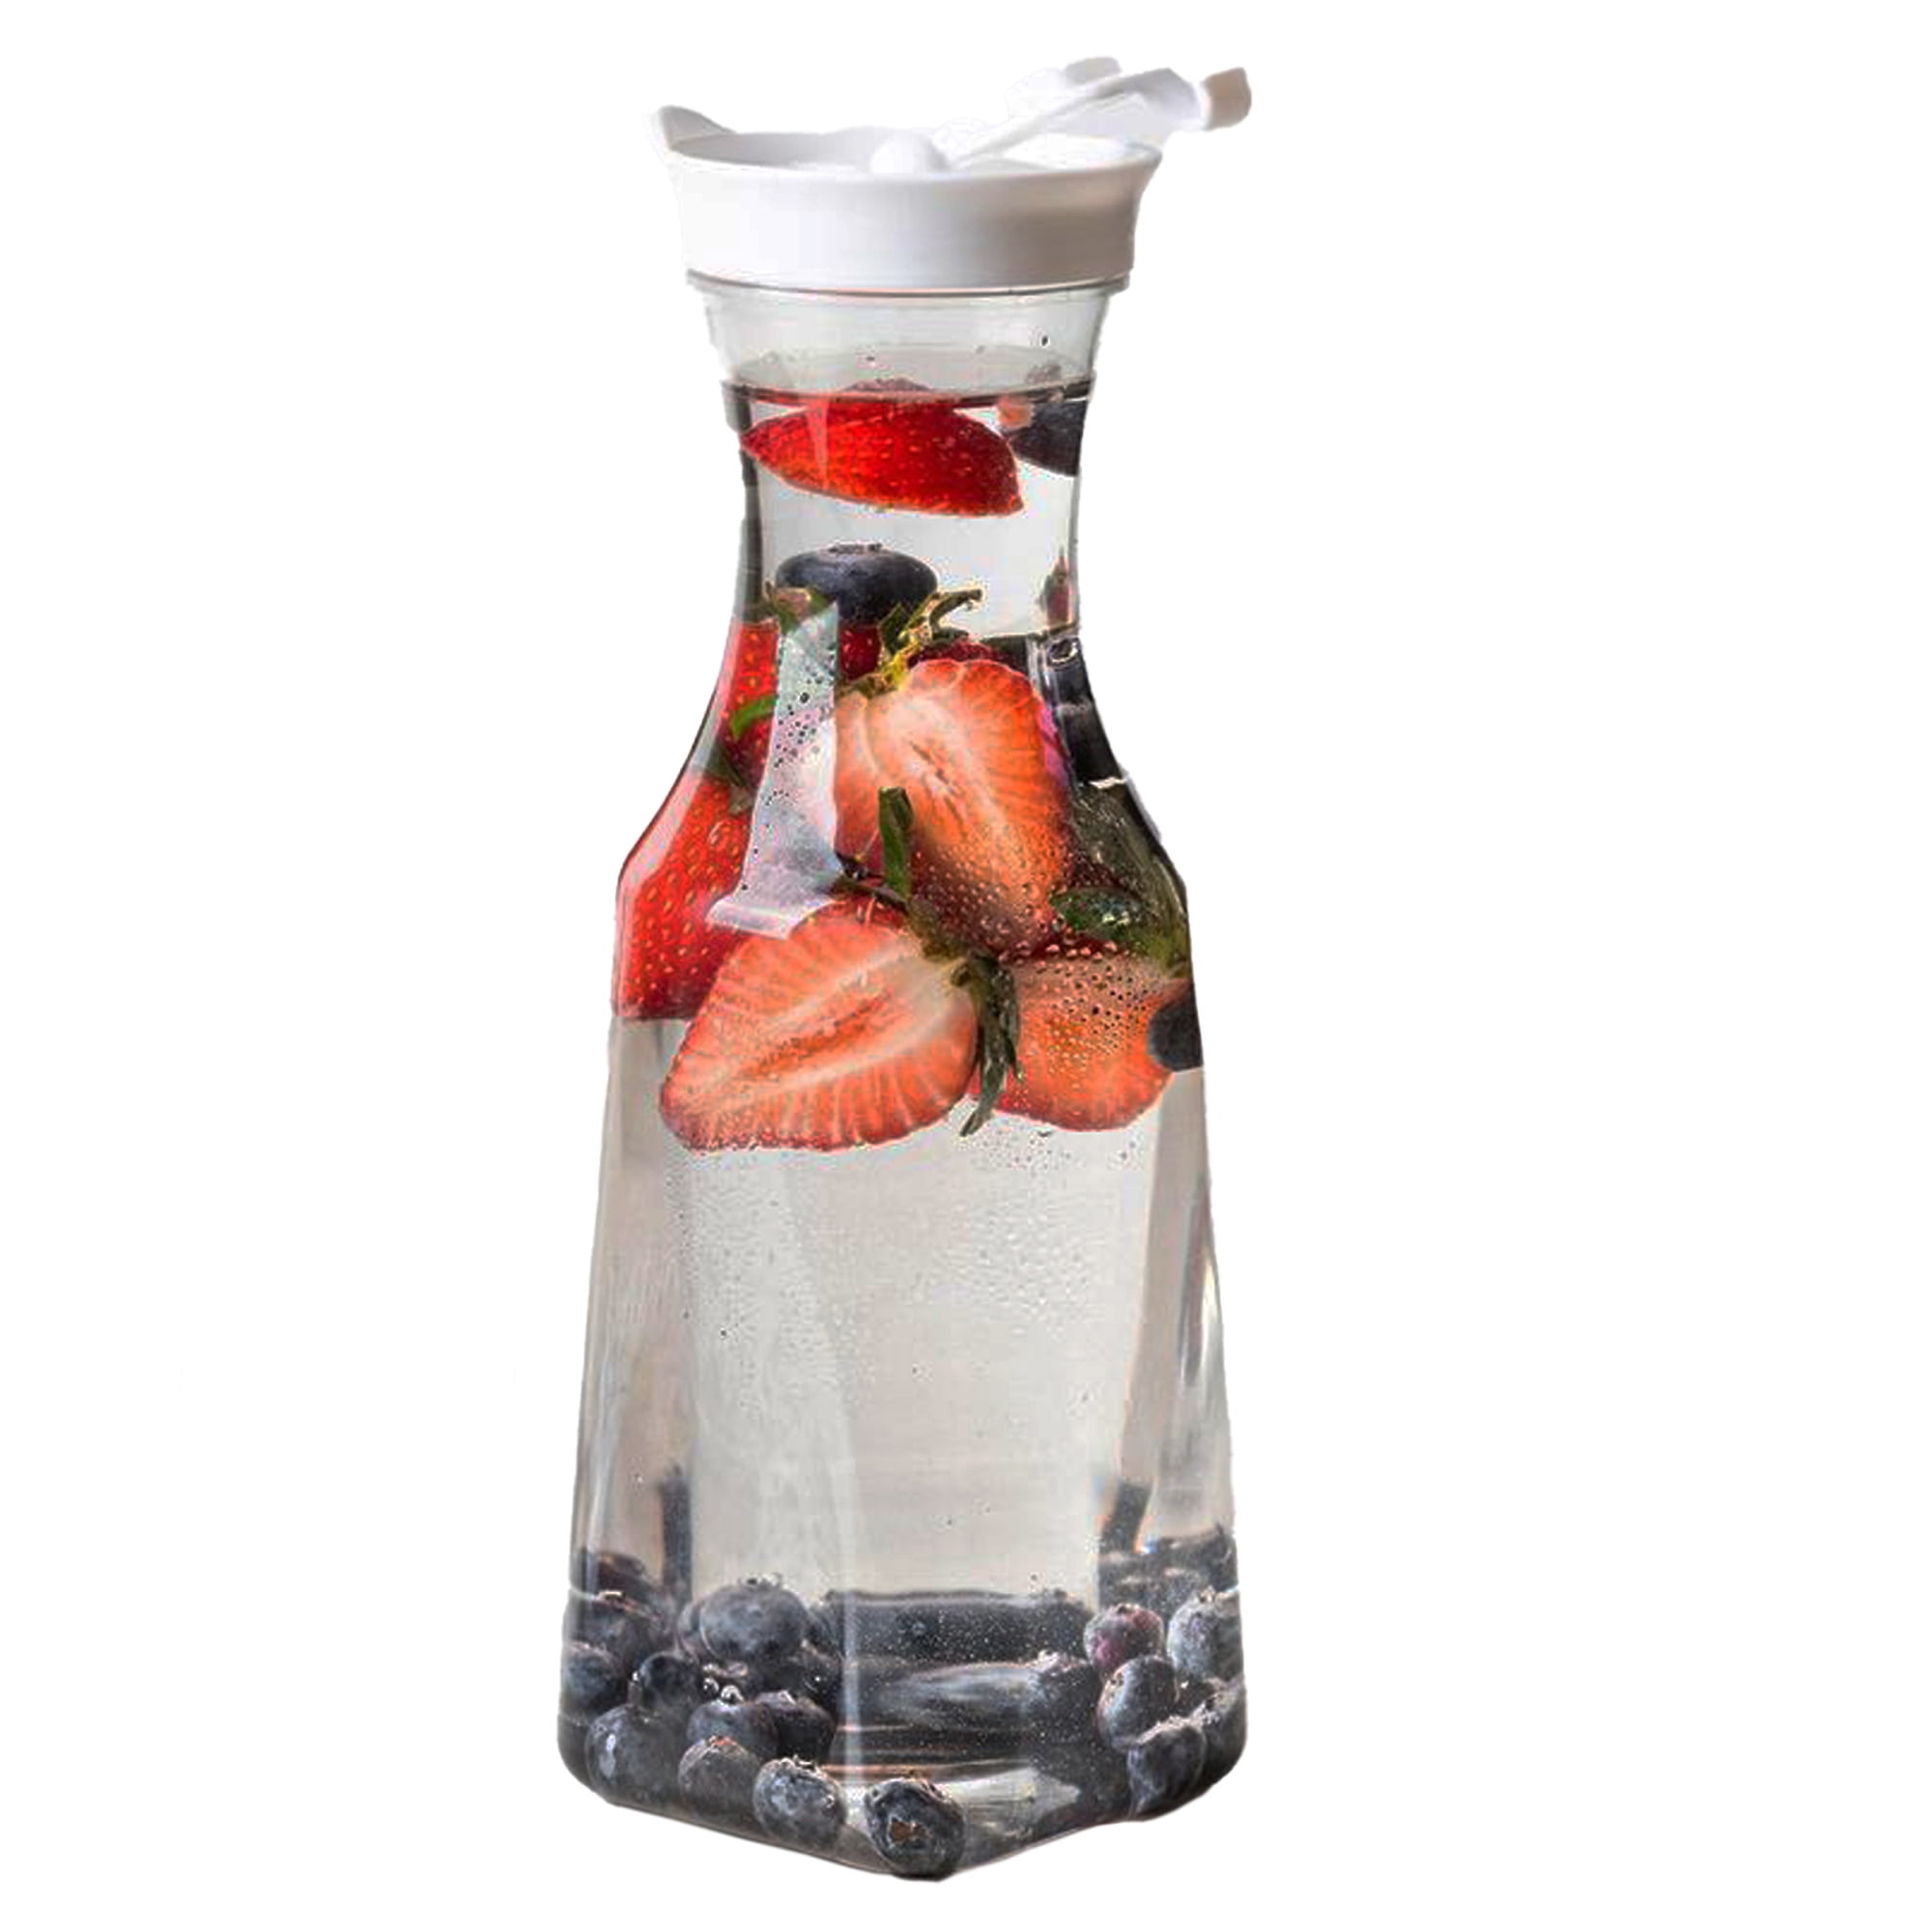 Plastic Carafe Water Pitcher - Carafes for Mimosa Bar - Clear